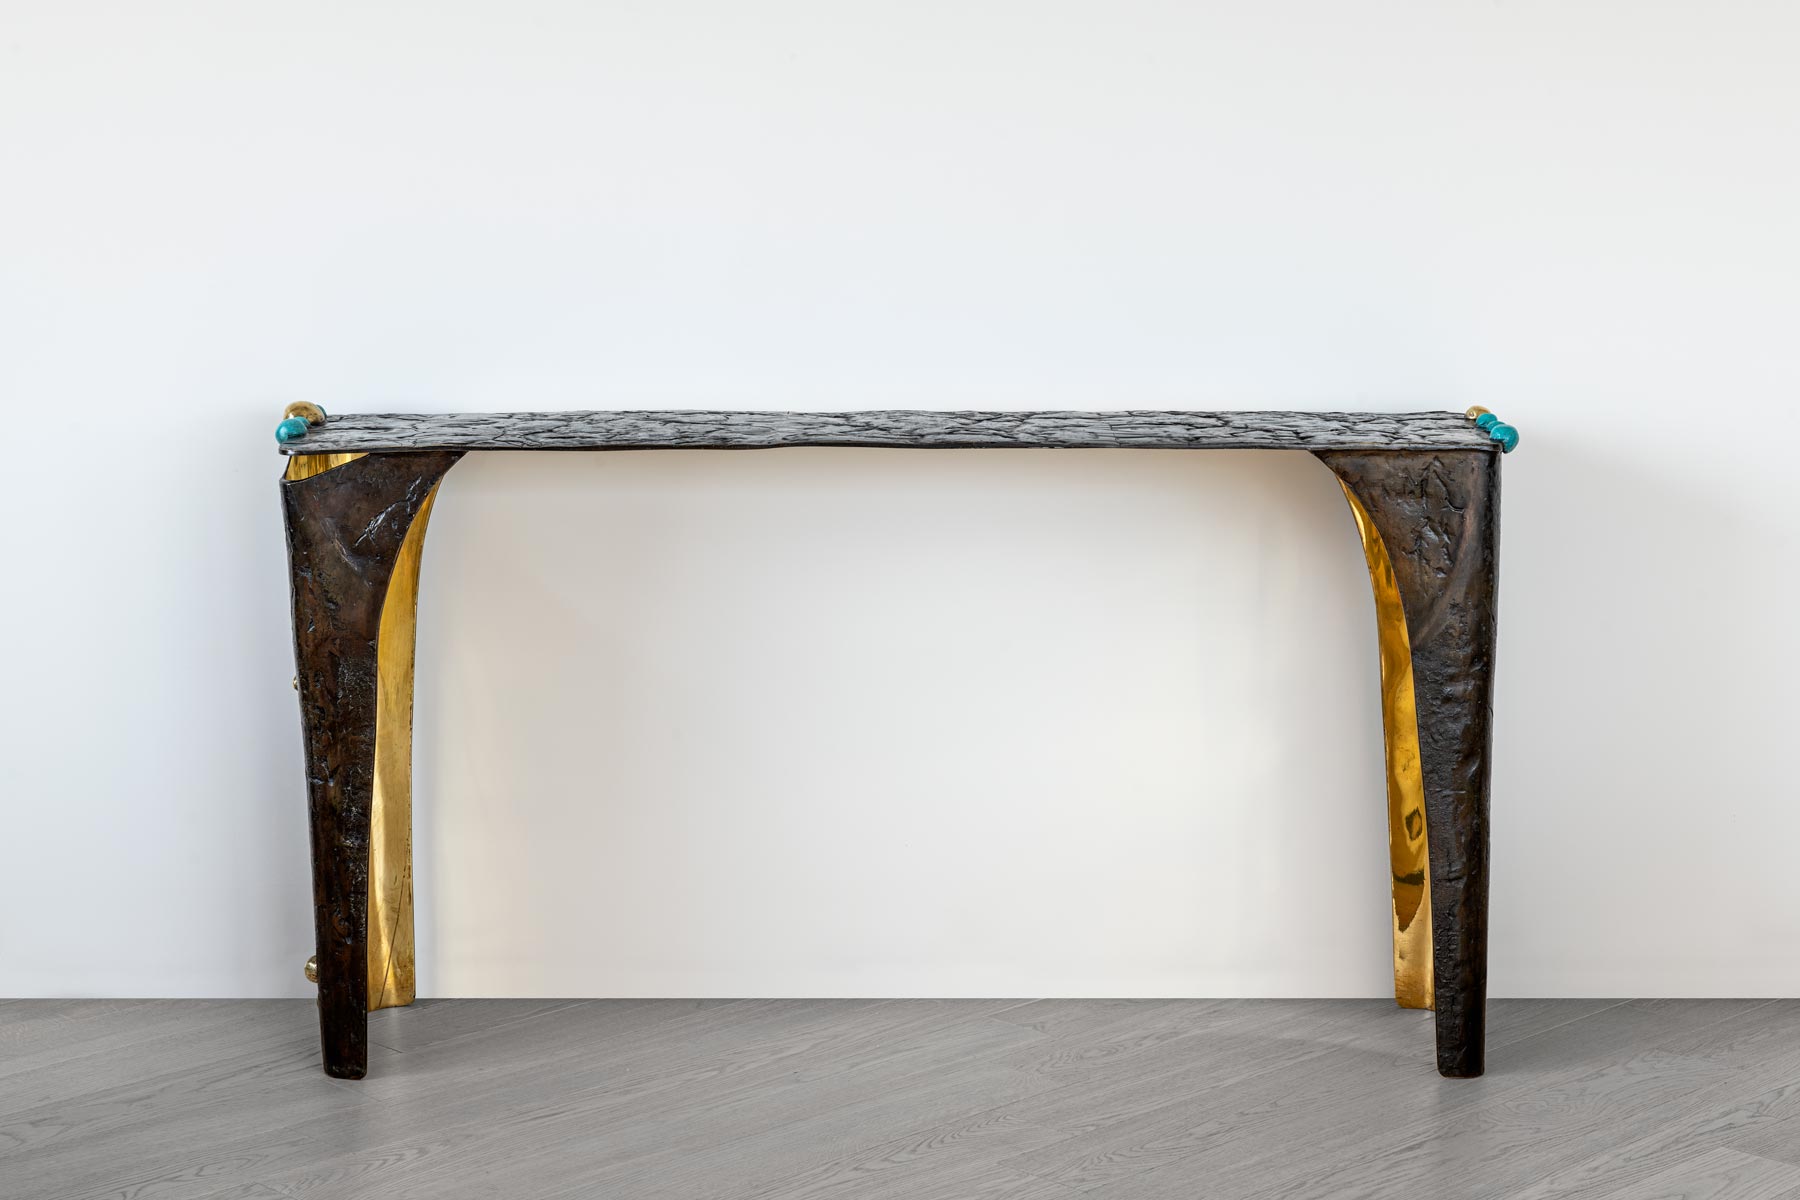 The Unwrapped Console Table, Veronica Mishaan